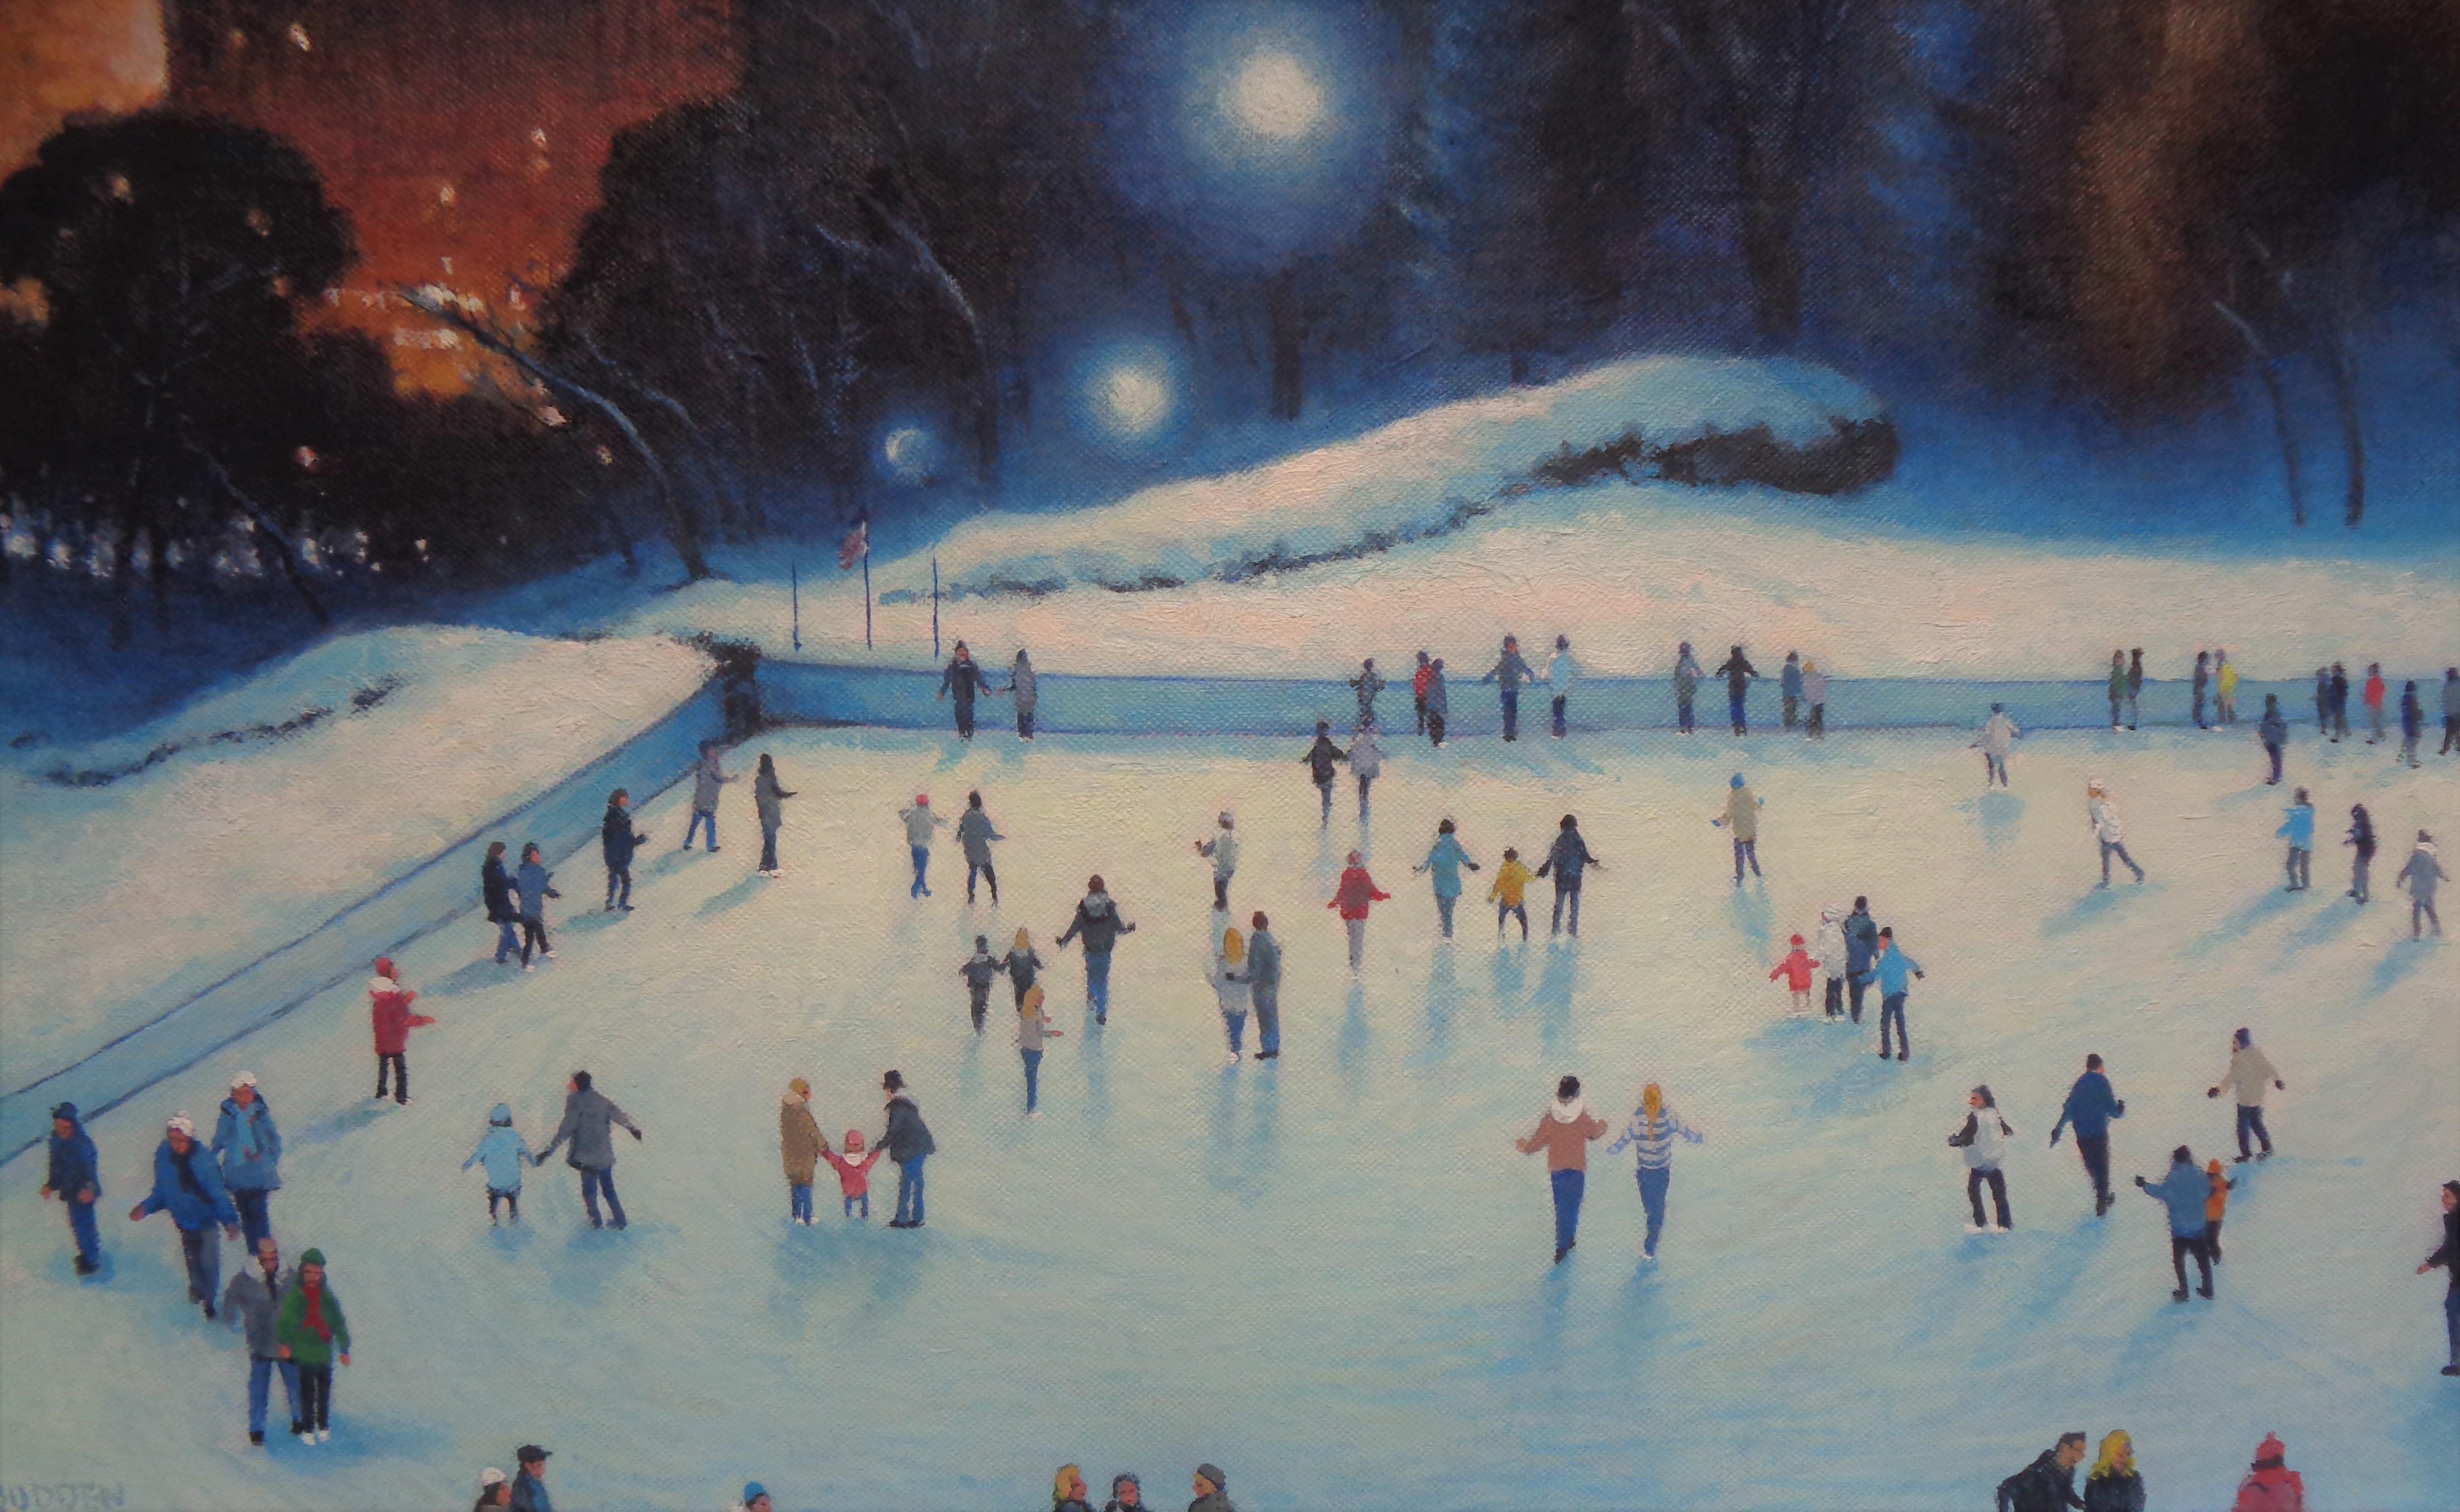  New York City Skating Painting Michael Budden Evening Lights Central Park For Sale 3